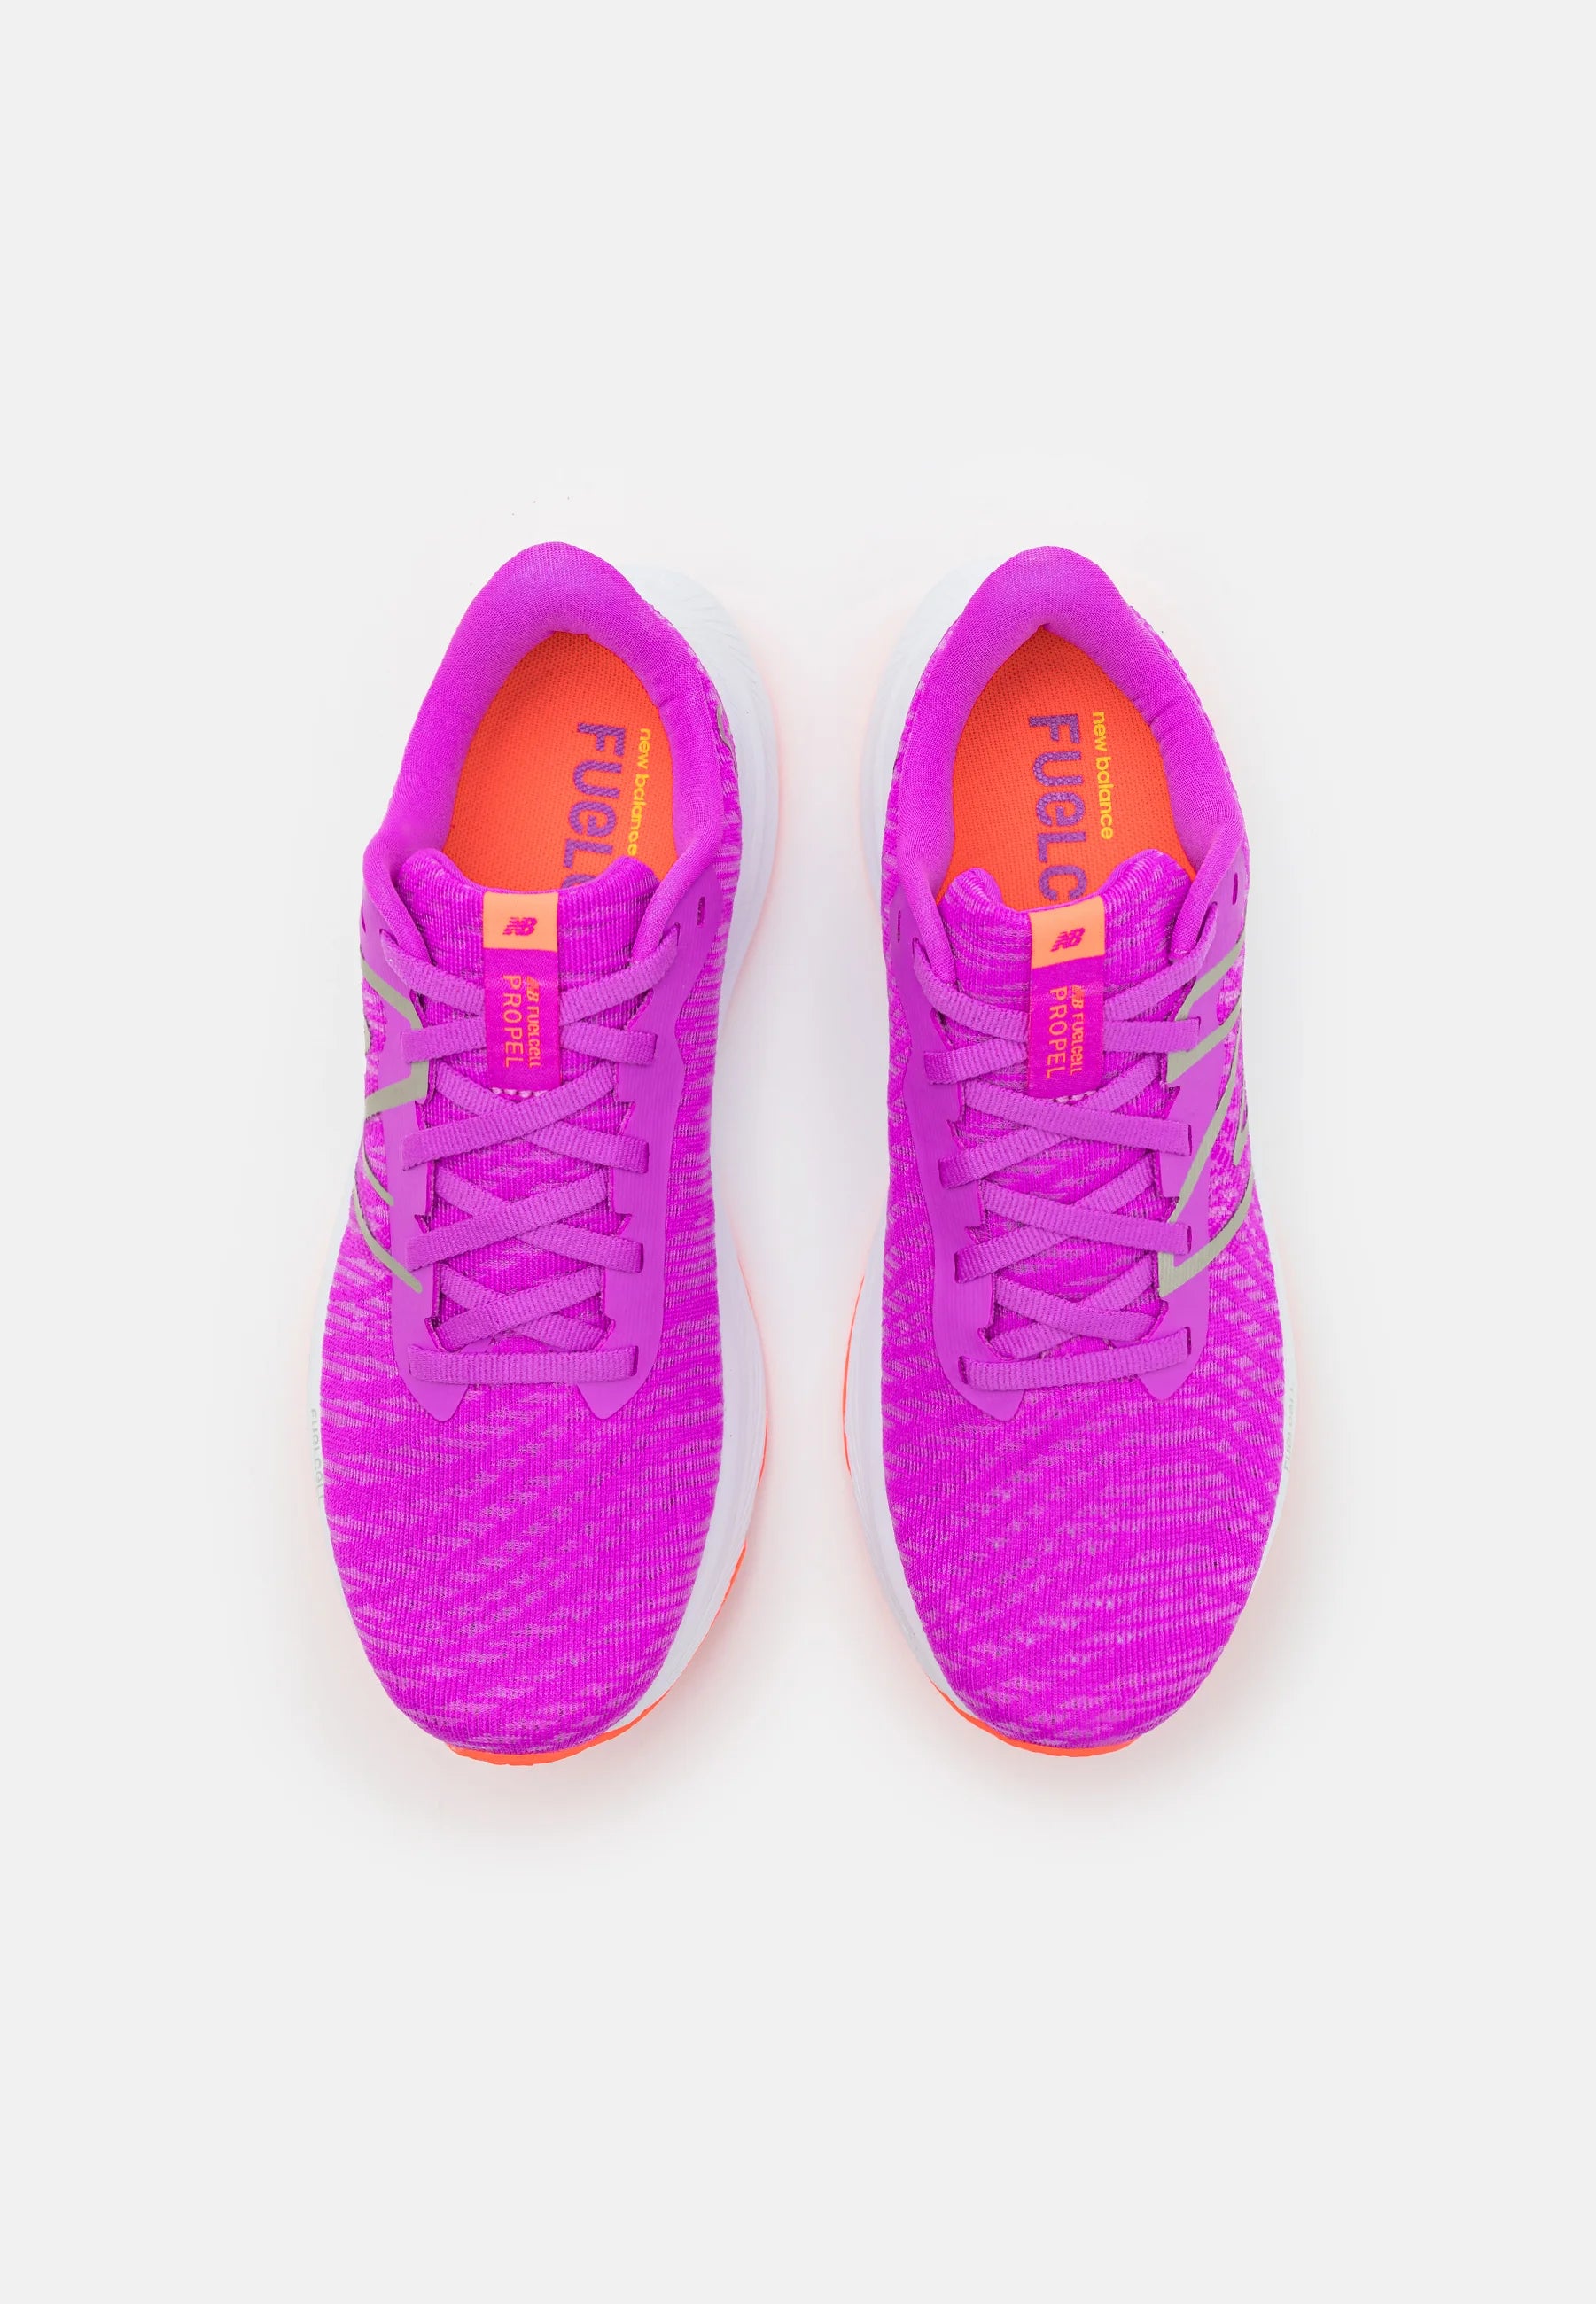 New Balance FuelCell Propel v4 Women's